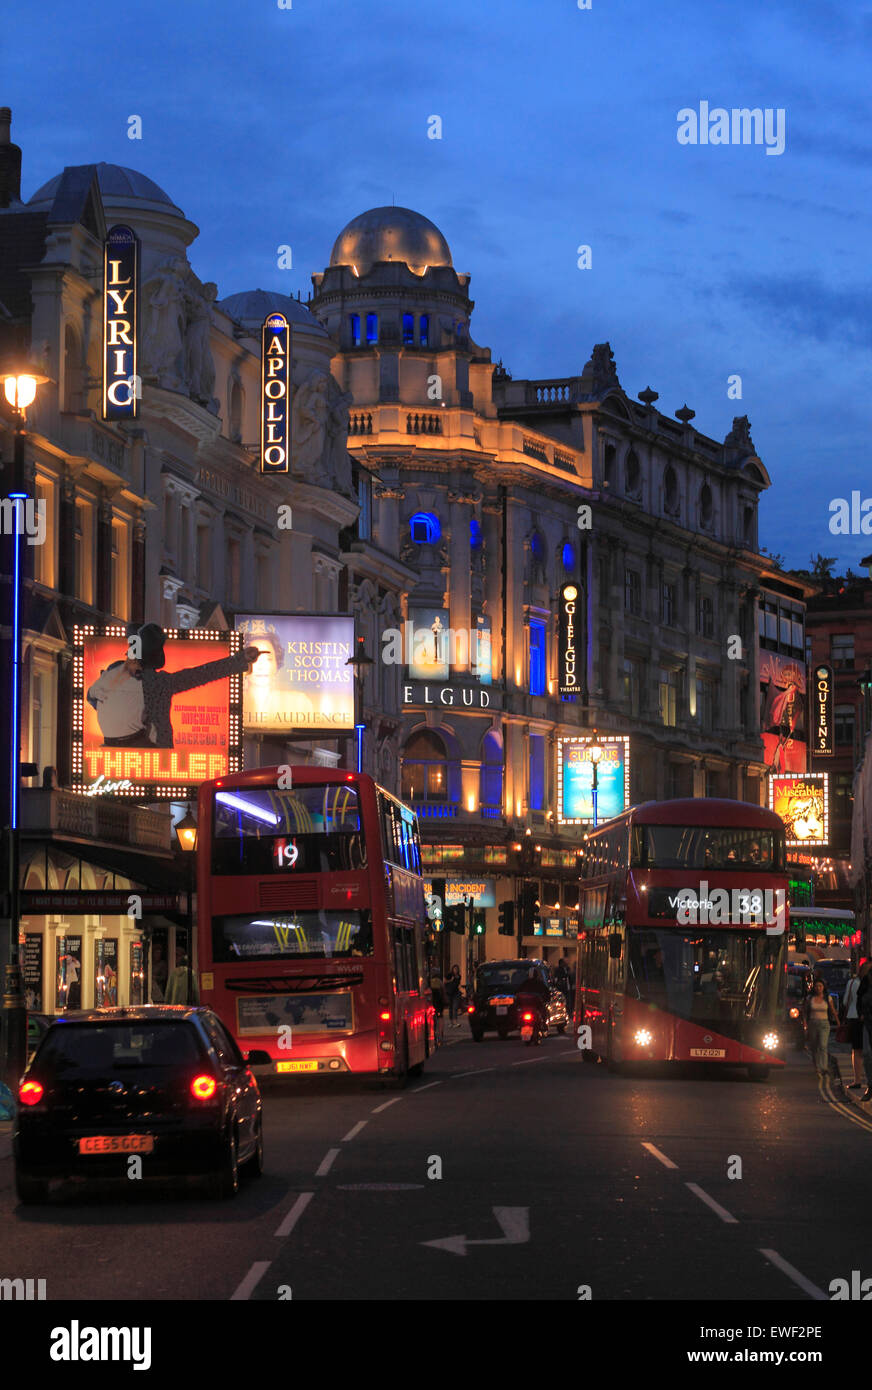 Shaftesbury Avenue Theatres in Londons West End. Stock Photo